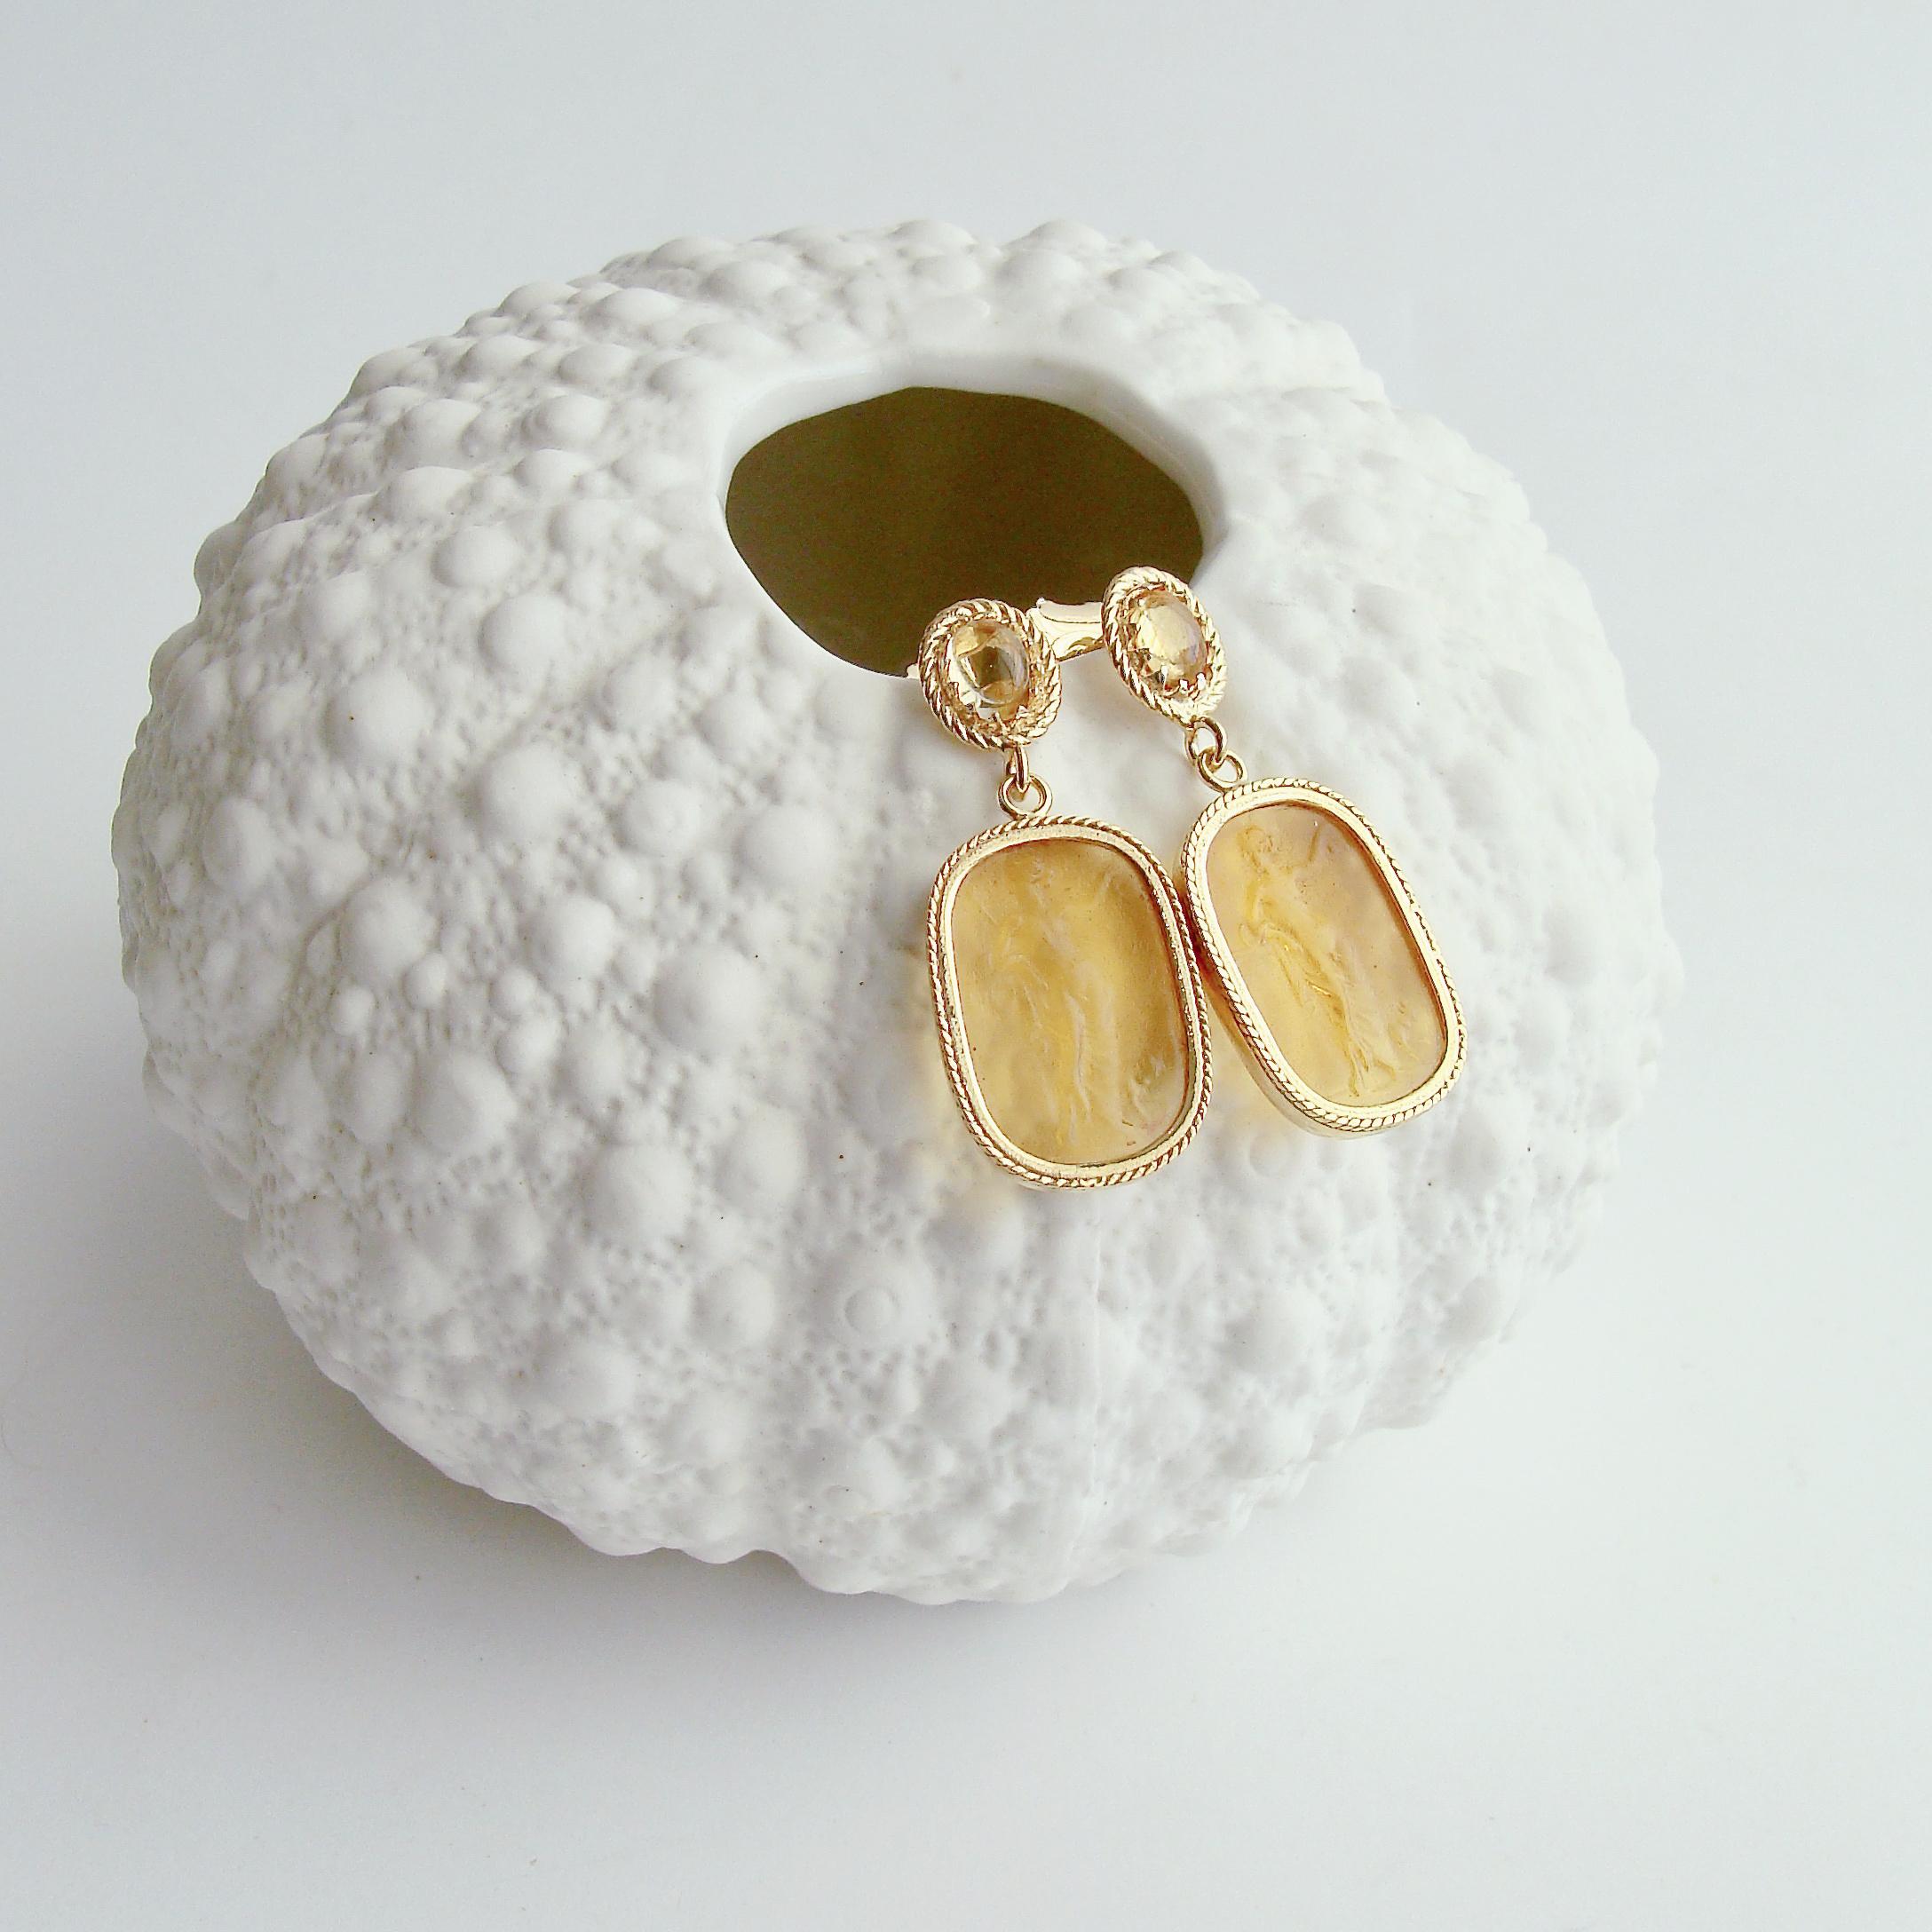 A stunning pair of Grecian goddess  intaglios with gossamer drape  in a gorgeous citrine color, are the nexus of these remarkable post style earrings.  The venetian glass intaglios are encased in a delicate herringbone setting which dangle sweetly